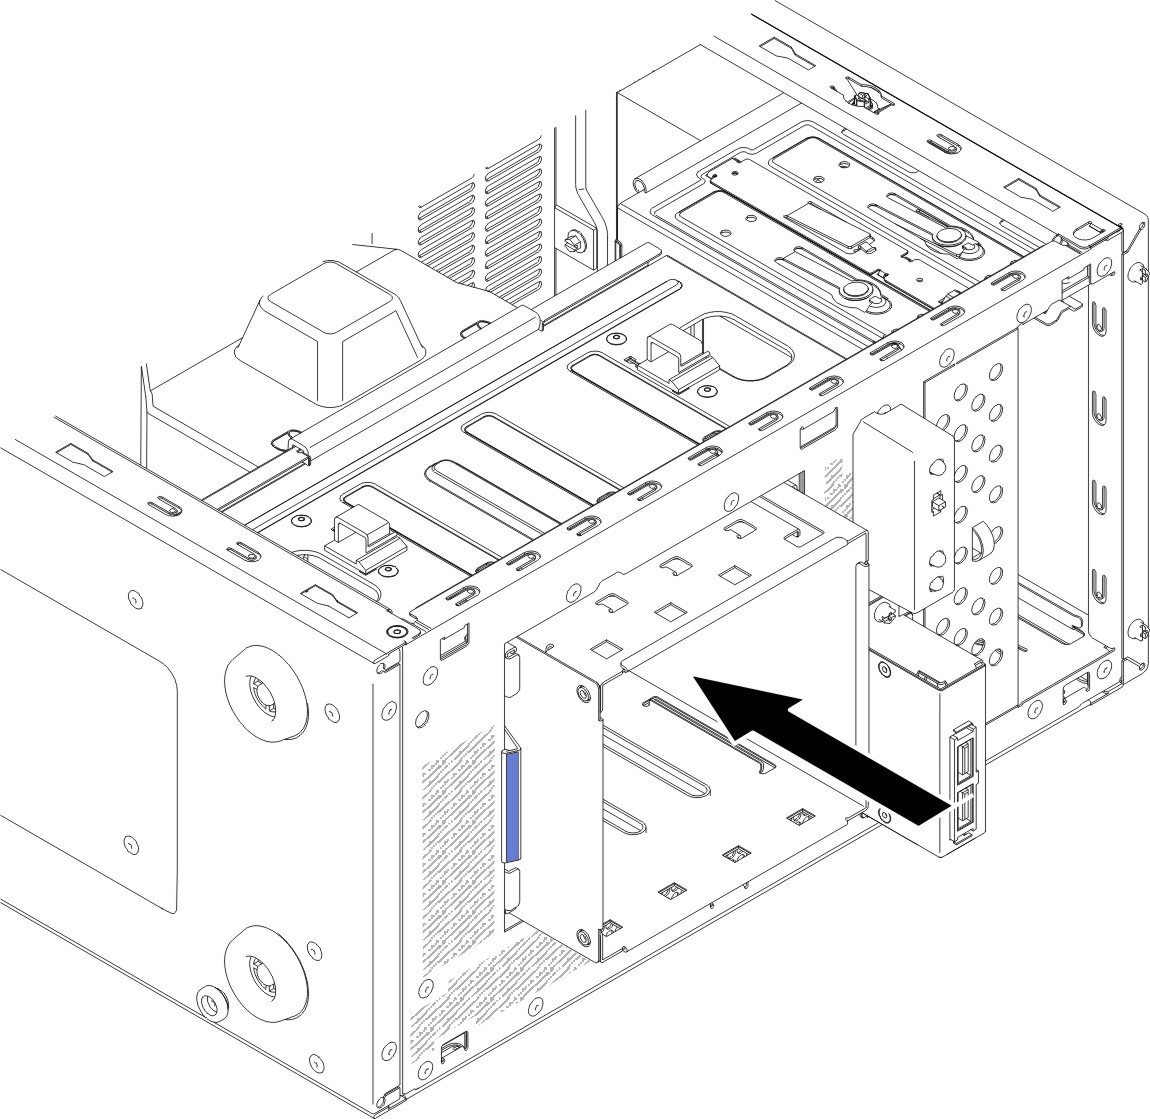 Pushing hard disk drive cage into chassis for 4U server model with non-hot-swap power supplies